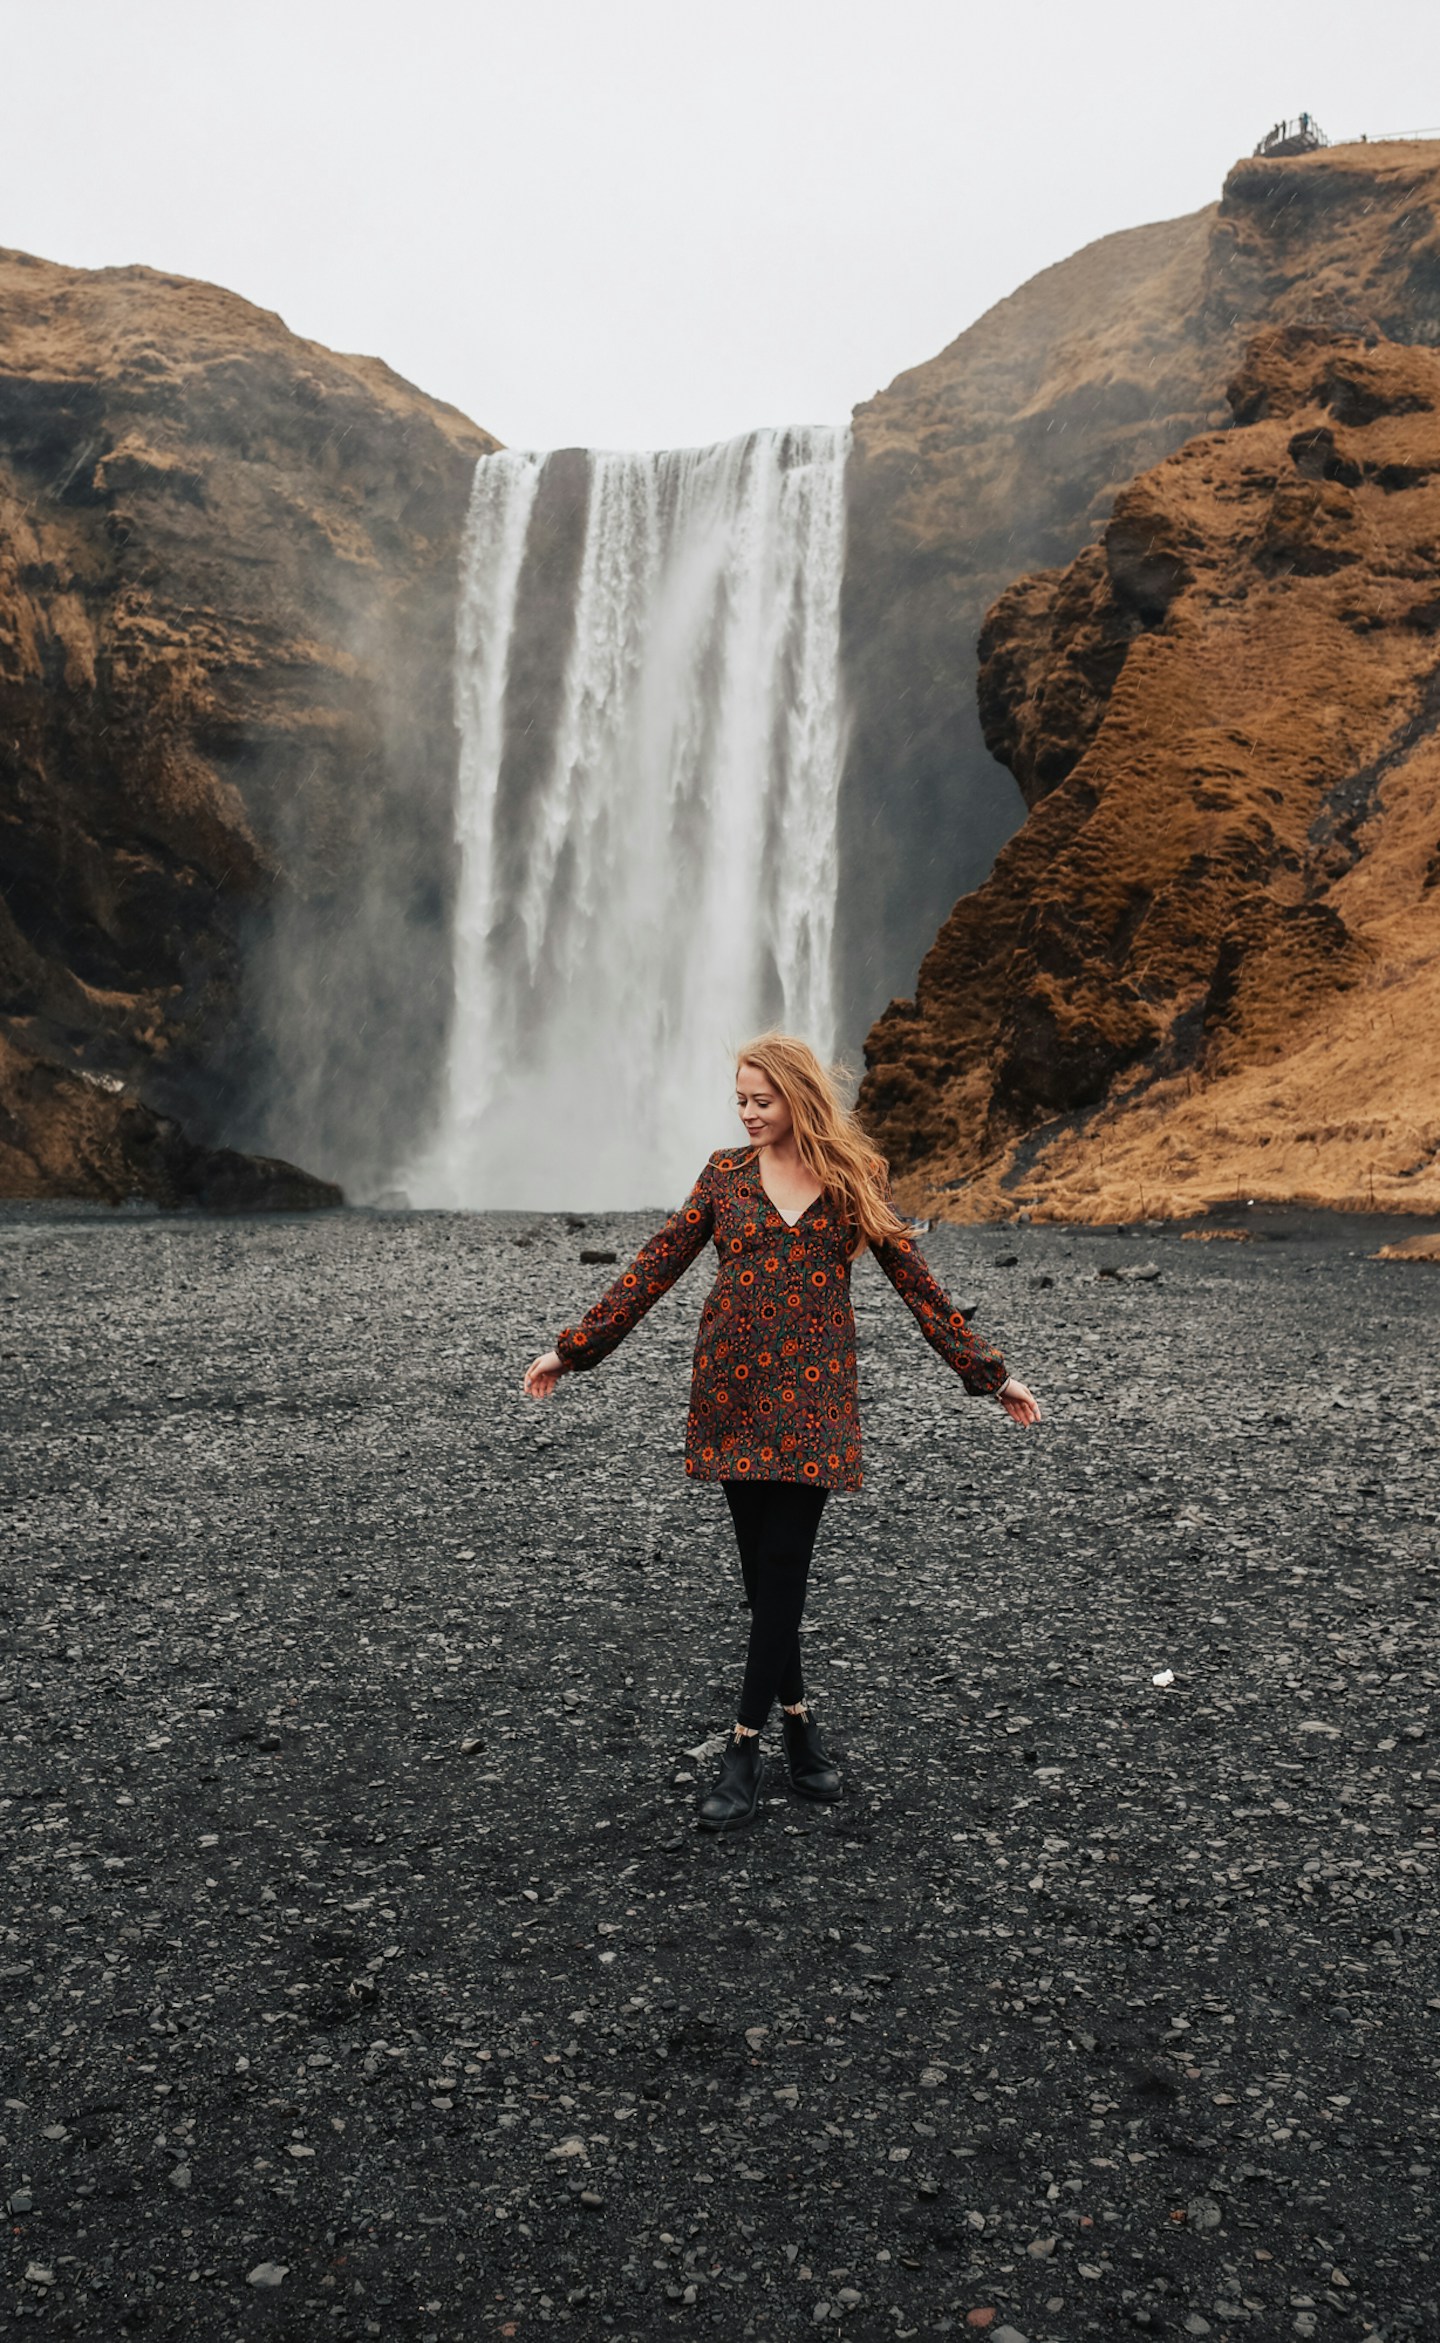 Southern Iceland Vik Travel Itinerary: Skógafoss waterfall is a gorgeous, natural waterfall in Southern Iceland. In March, there weren't too many crowds in the morning and the views of the falls were spectacular.